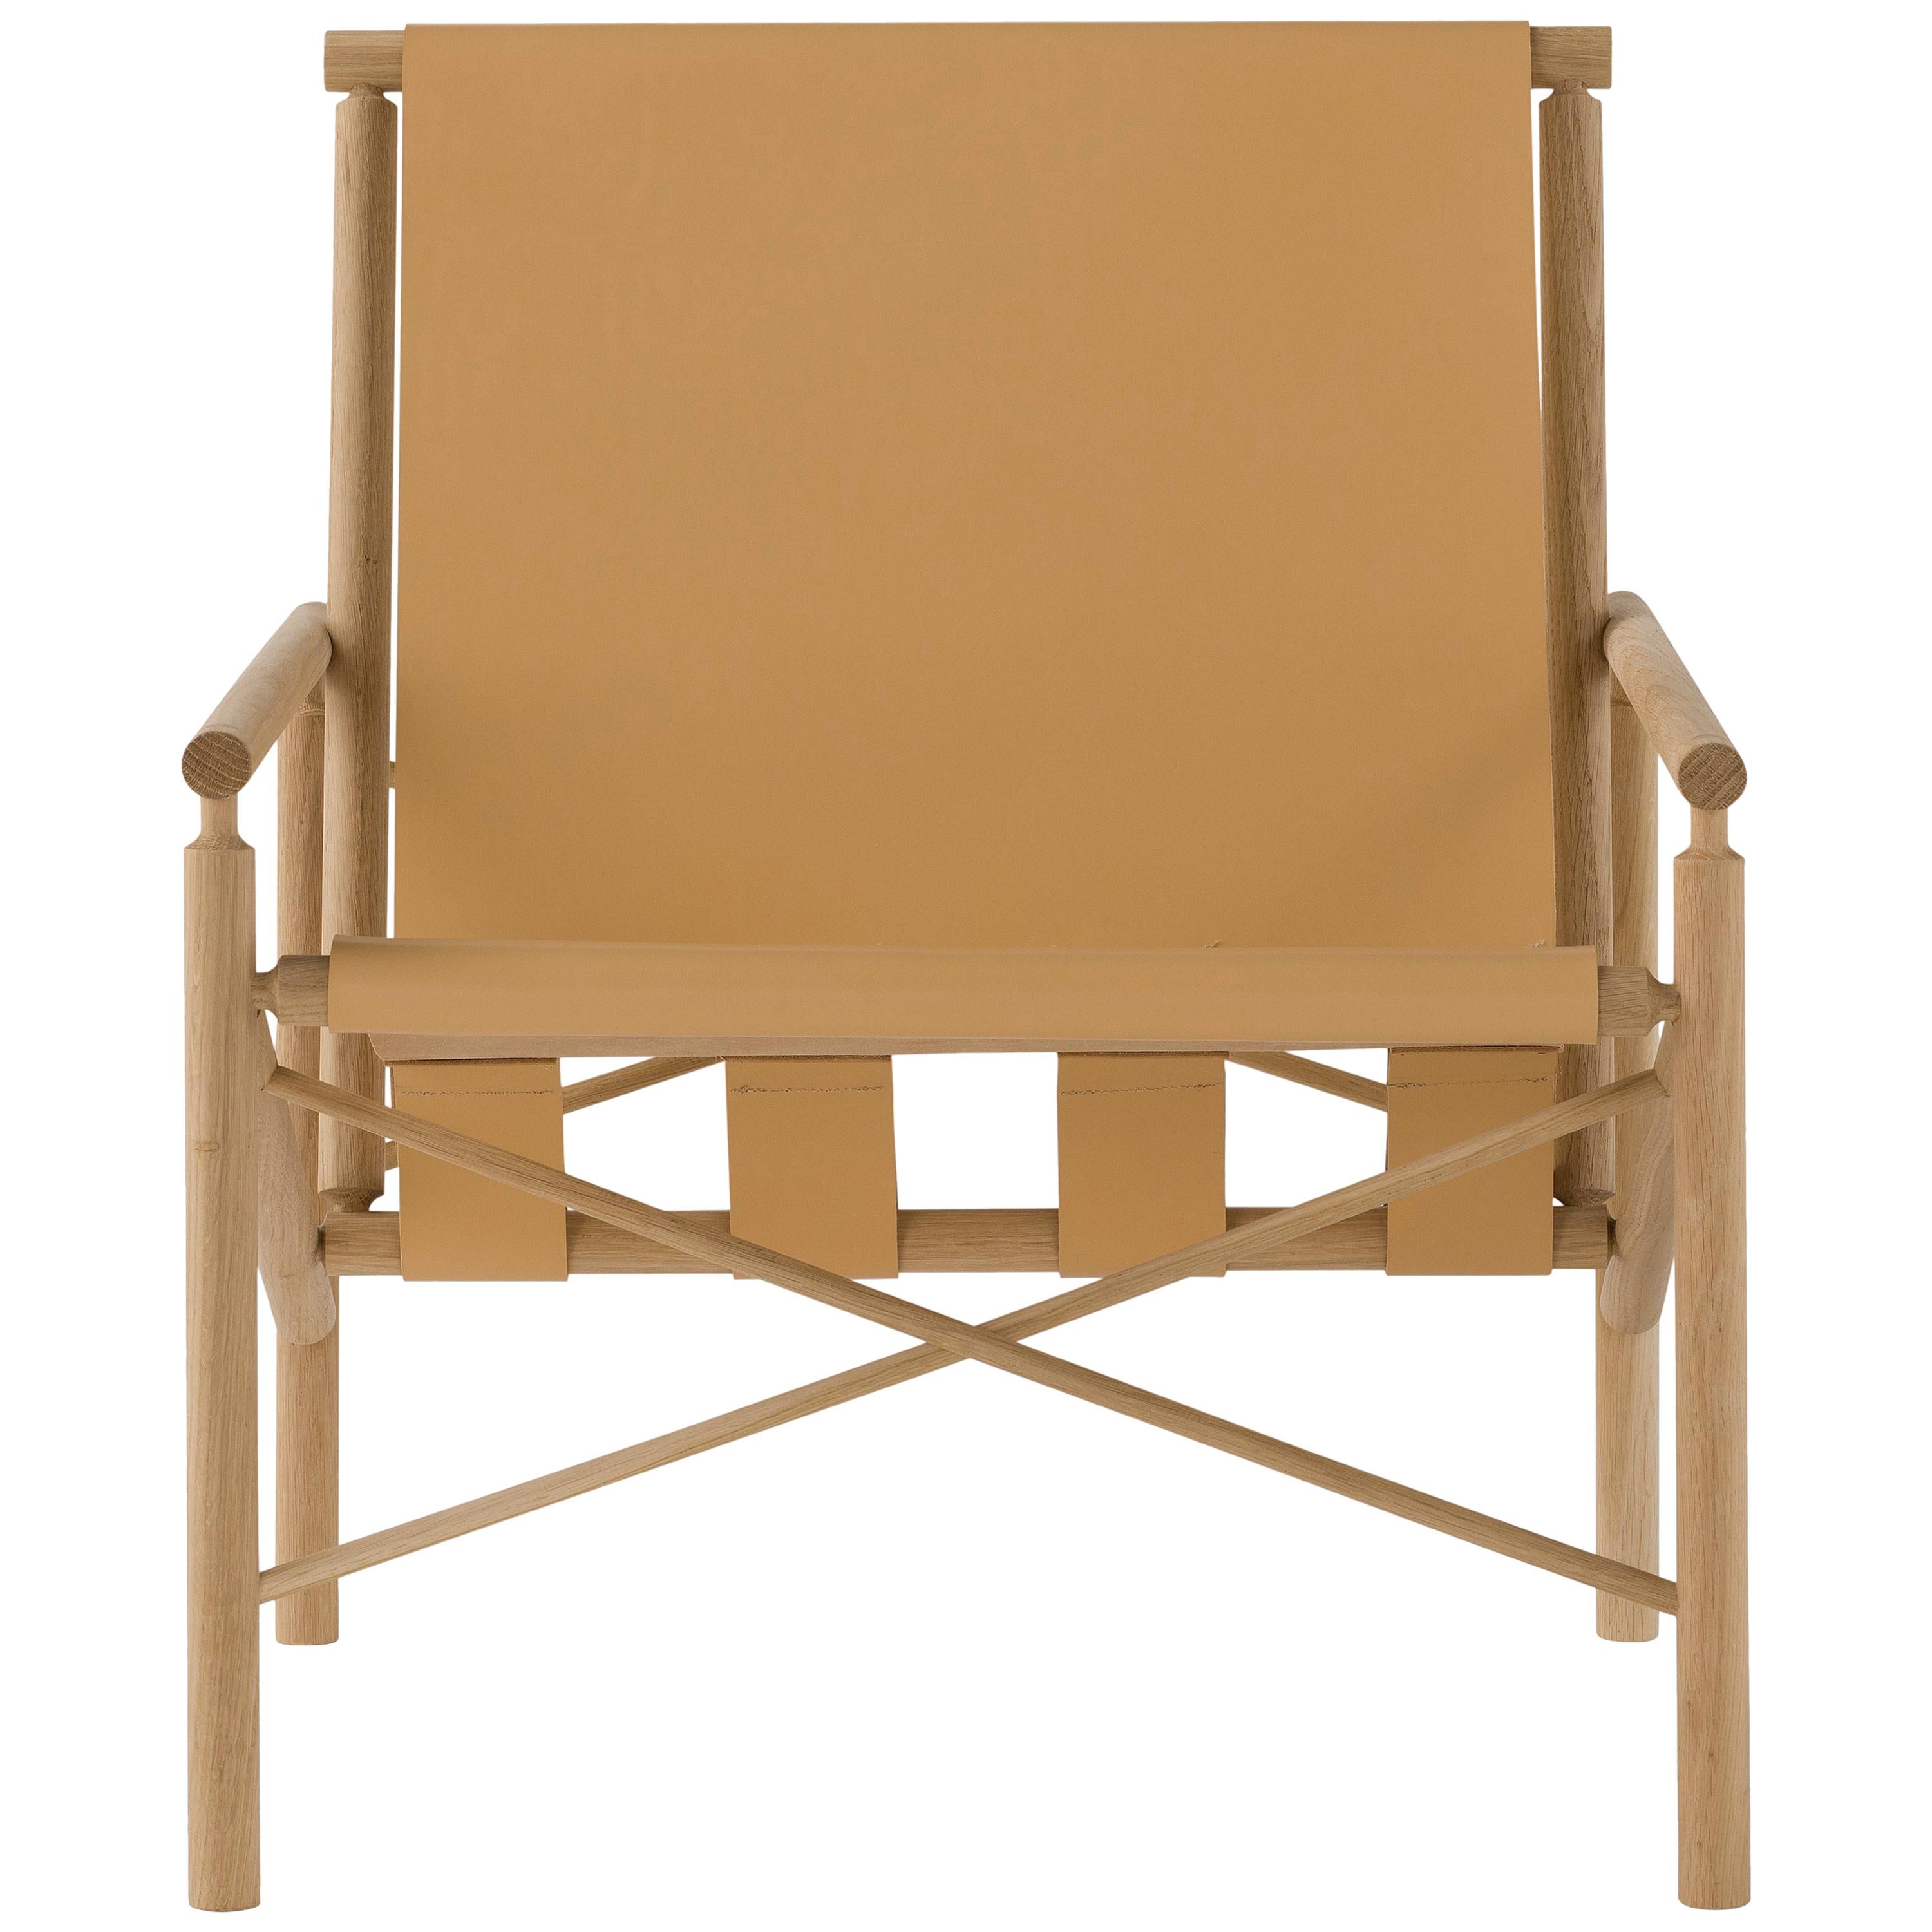 Amura 'Ease' Chair in Light Tan Leather by Gareth Neal For Sale